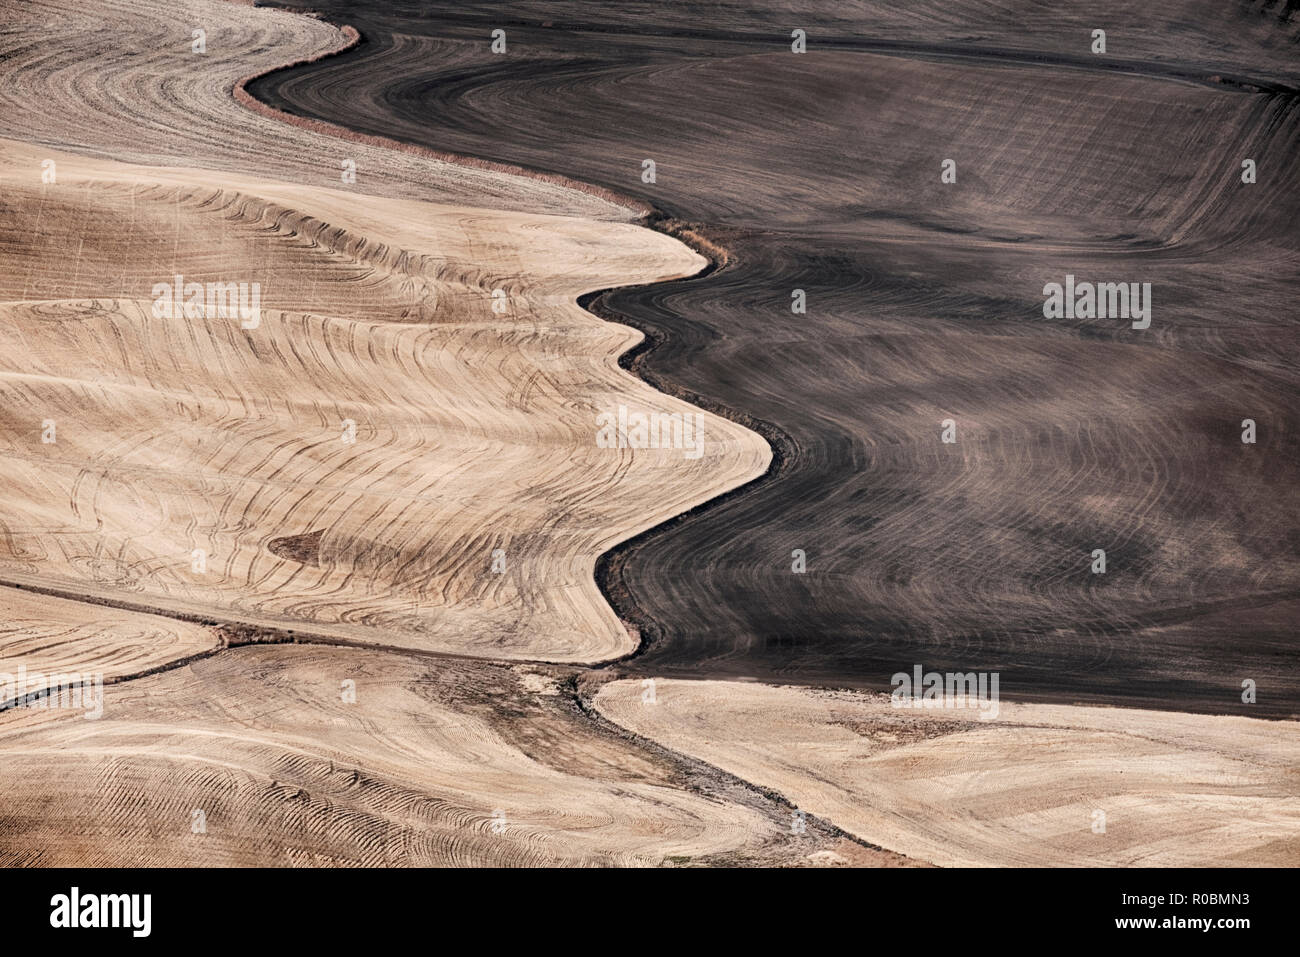 A nature abstract of the Palouse area of Eastern Washington that shows the natural contours of the hills as the fields are planted with winter wheat. Stock Photo